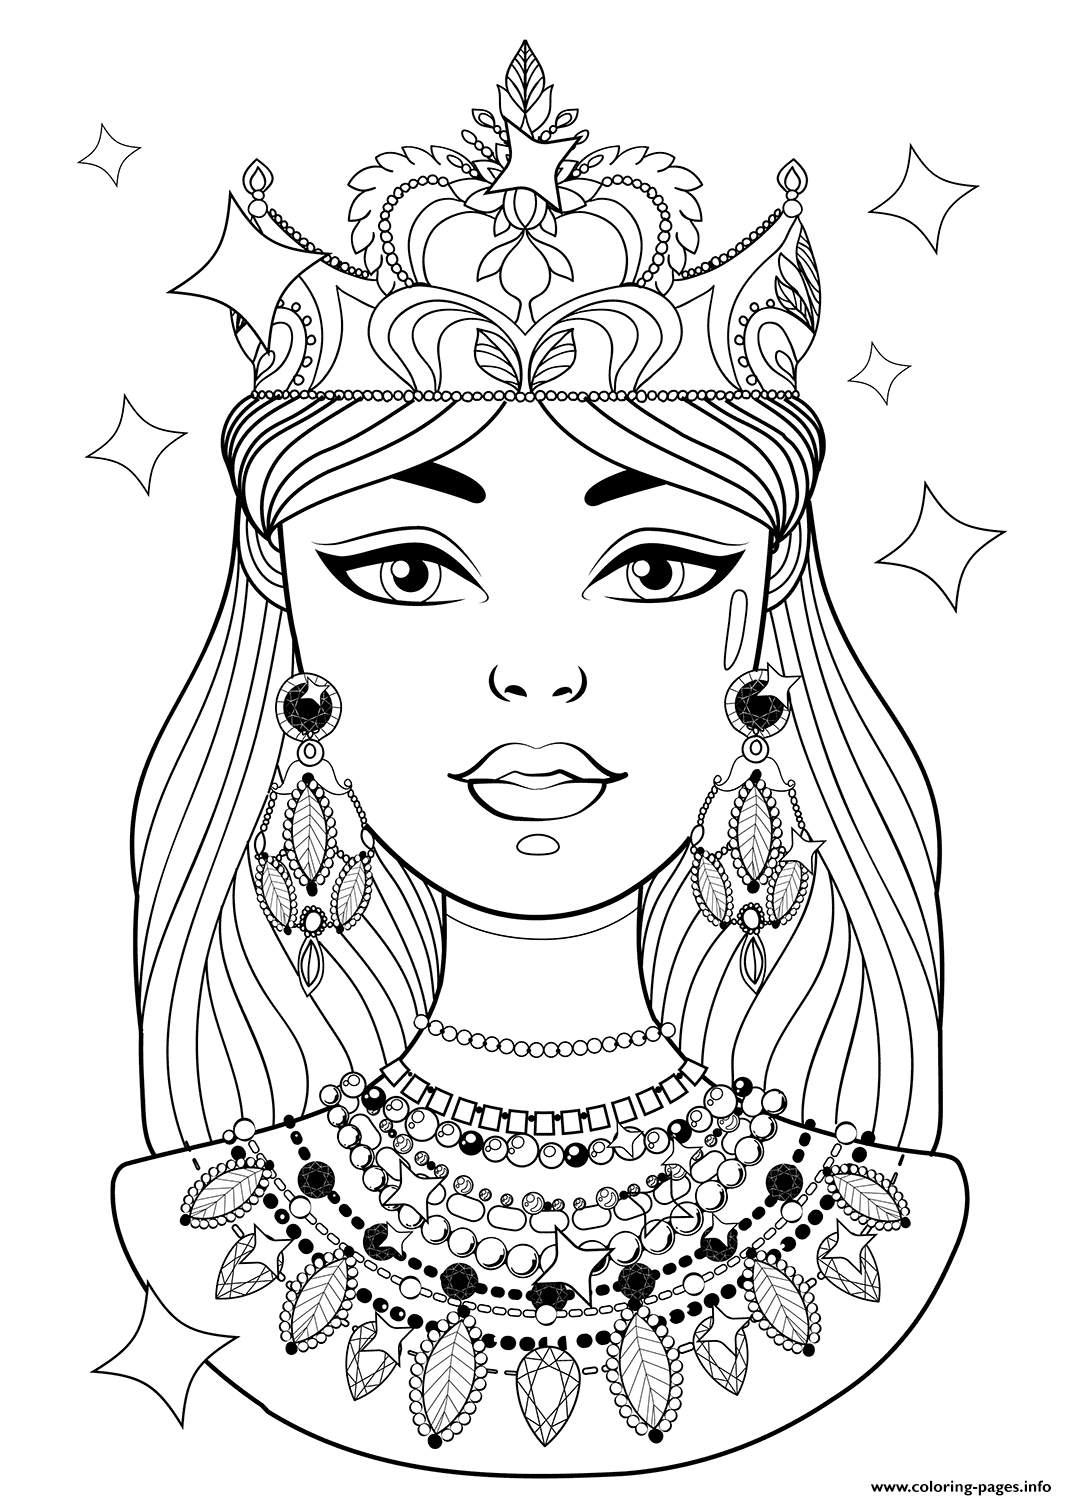 Download Shining Princess With Necklaces Coloring Pages Printable